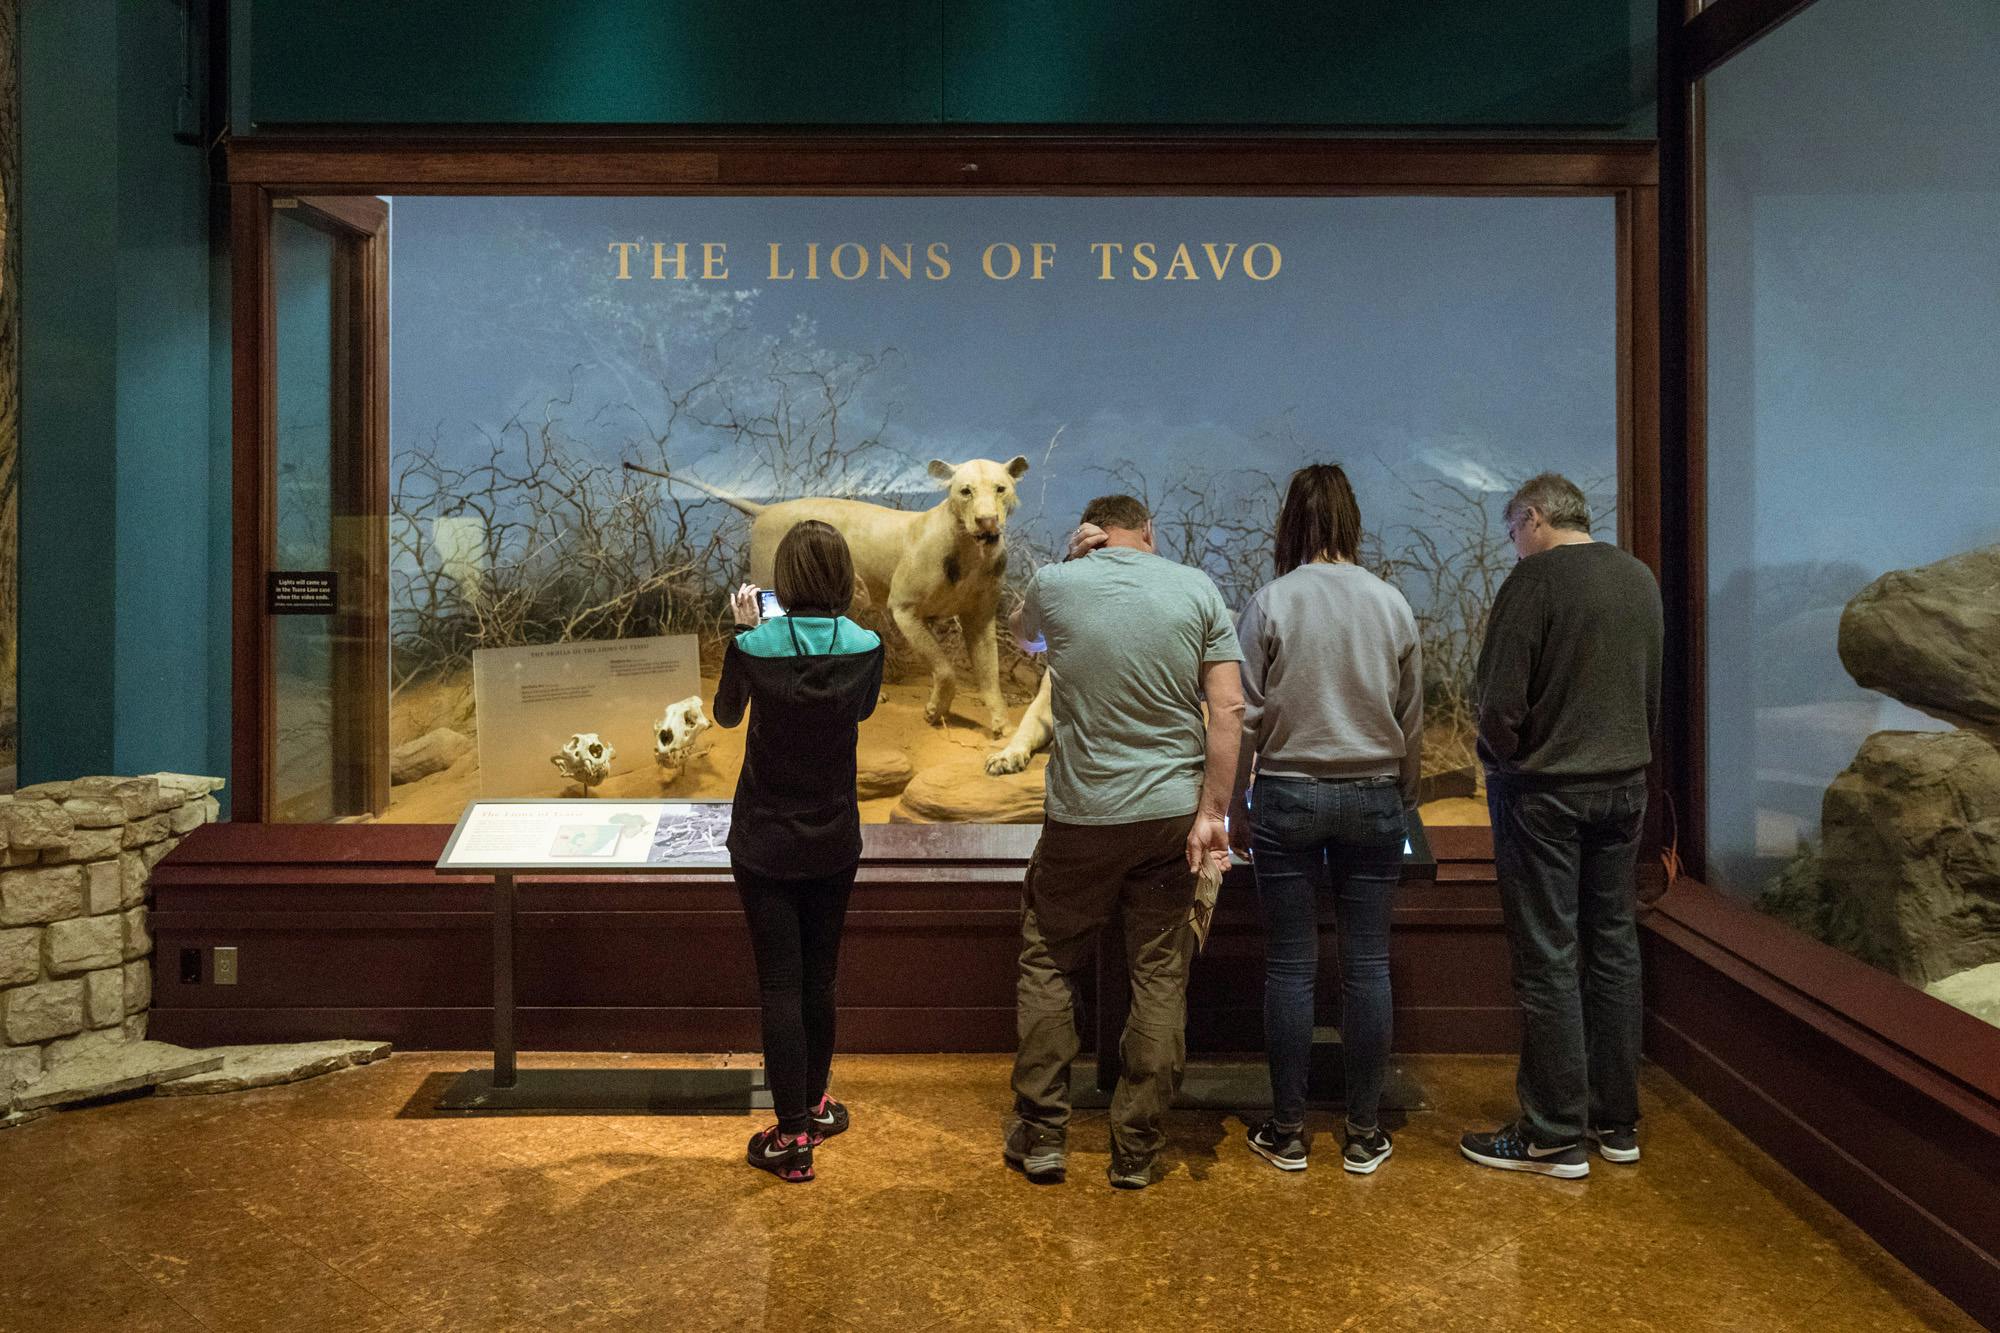 Four visitors stand together in front of two Lions of Tsavo dioramas. The leftmost visitor takes a picture of two lion skulls displayed on pedestals near the lions inside the diorama case.